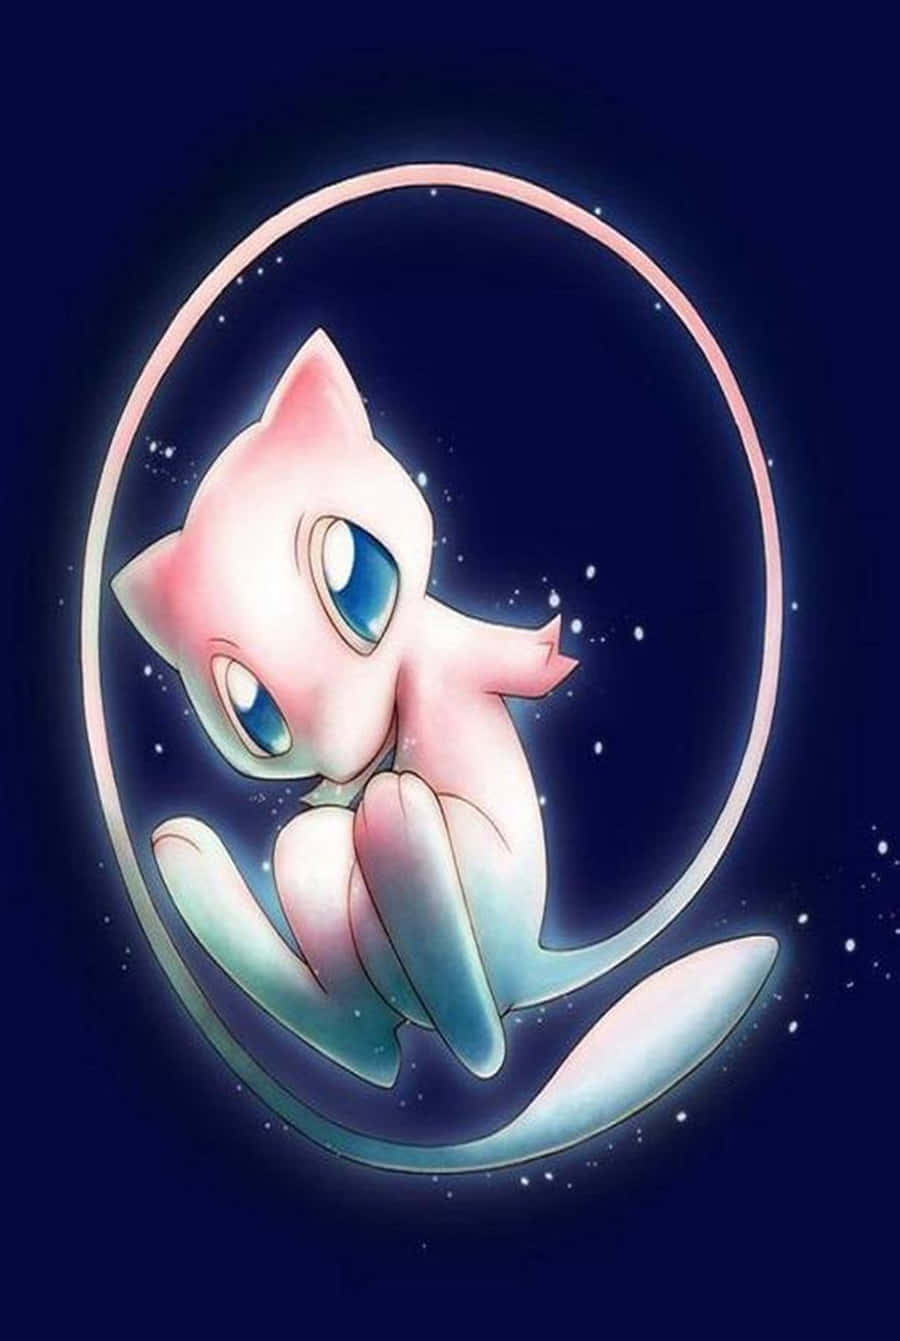 All-time favorite, Mew